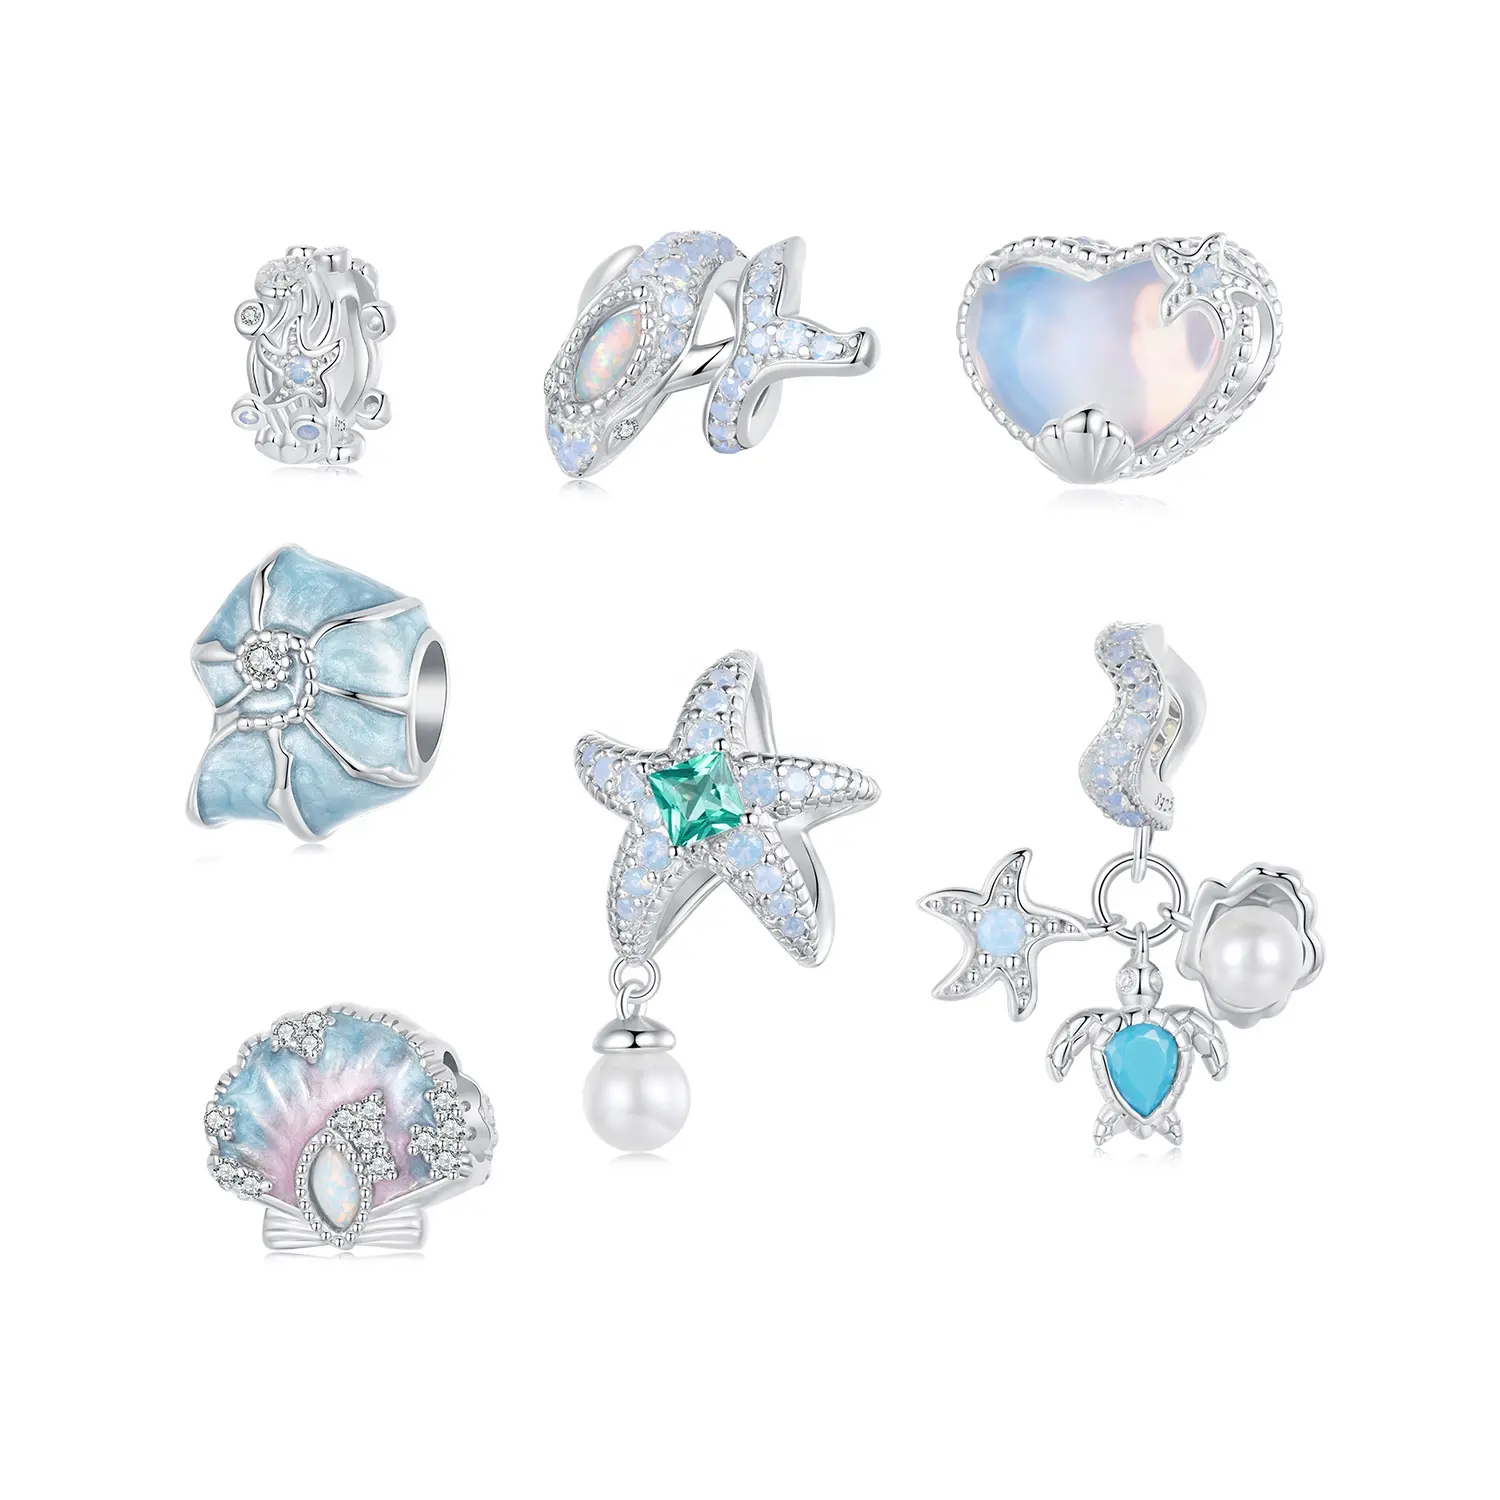 Fashion Sterling Silver Jewelry Charms For Bracelet Elegant Nano Opal Fantasy Starfish Shell Blue Conch Whale Ocean Beads Charm